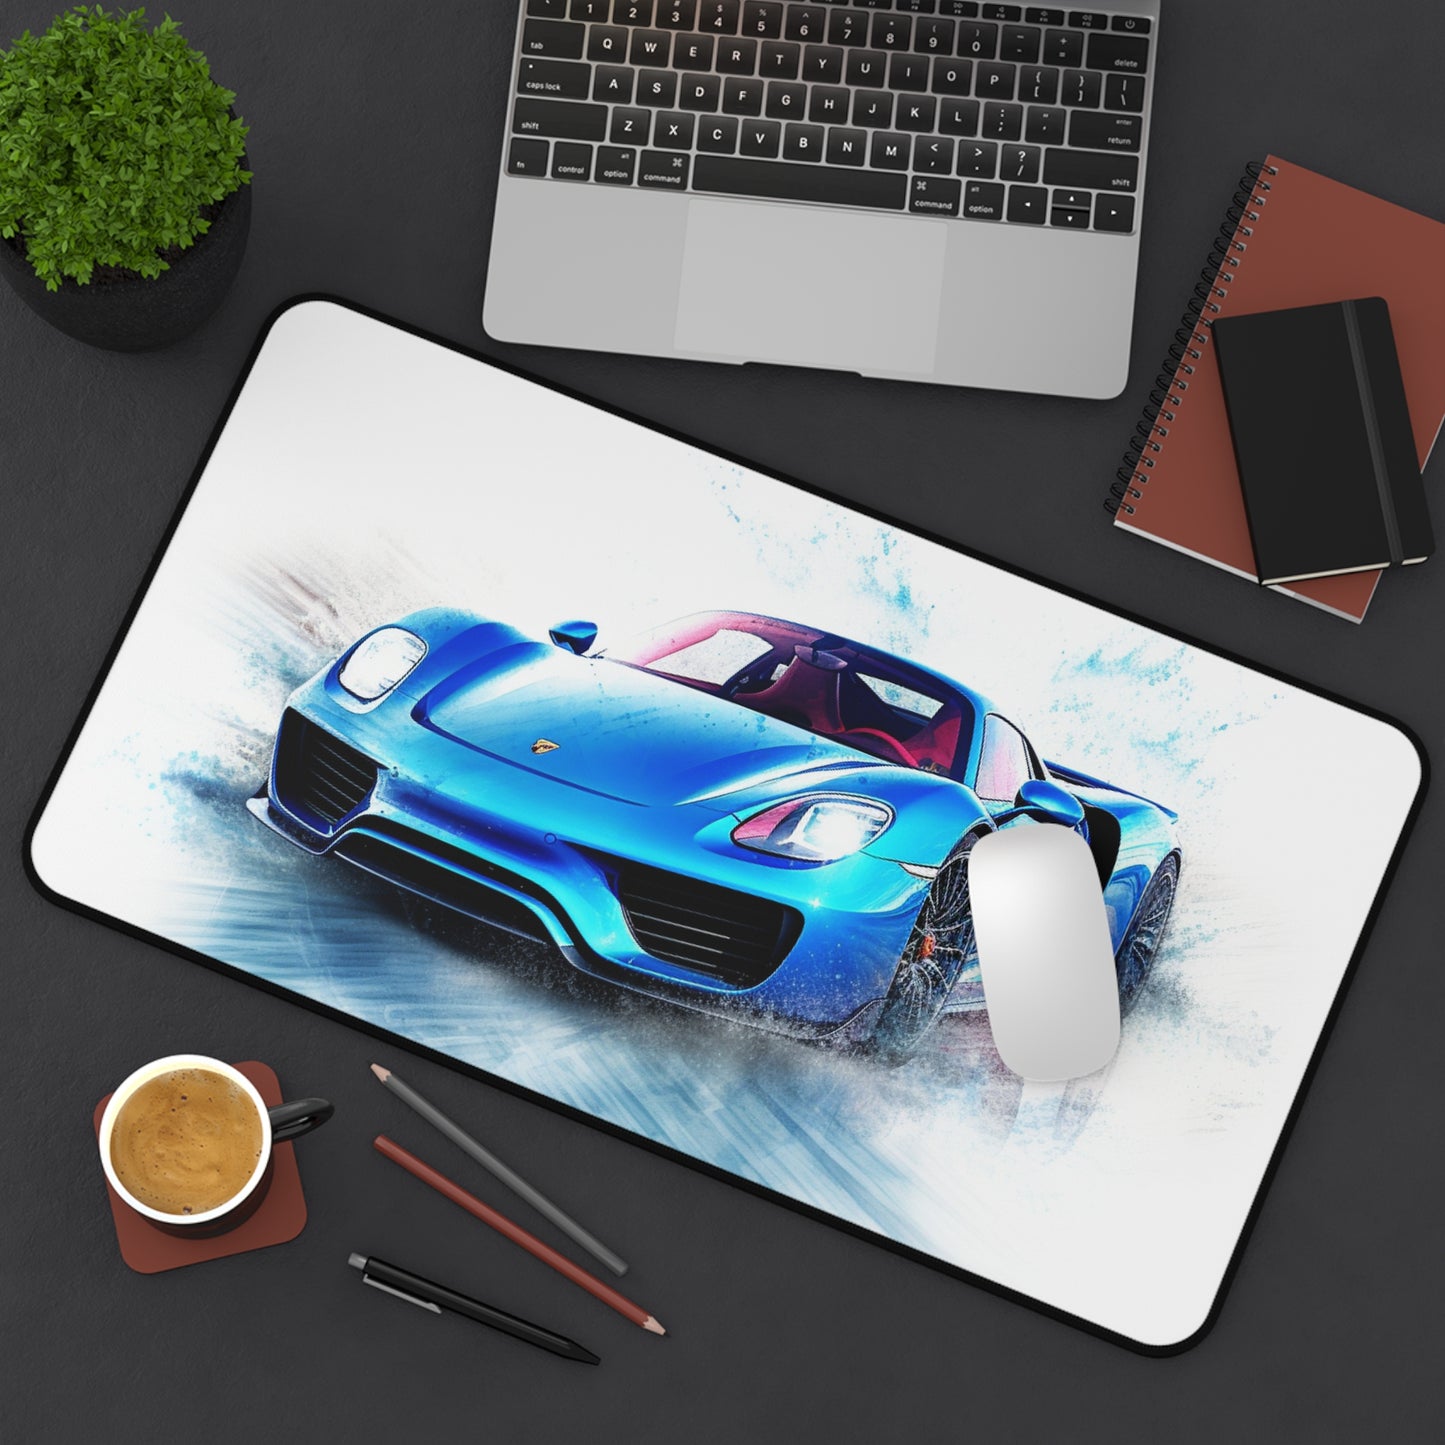 Desk Mat 918 Spyder with white background driving fast on water 1